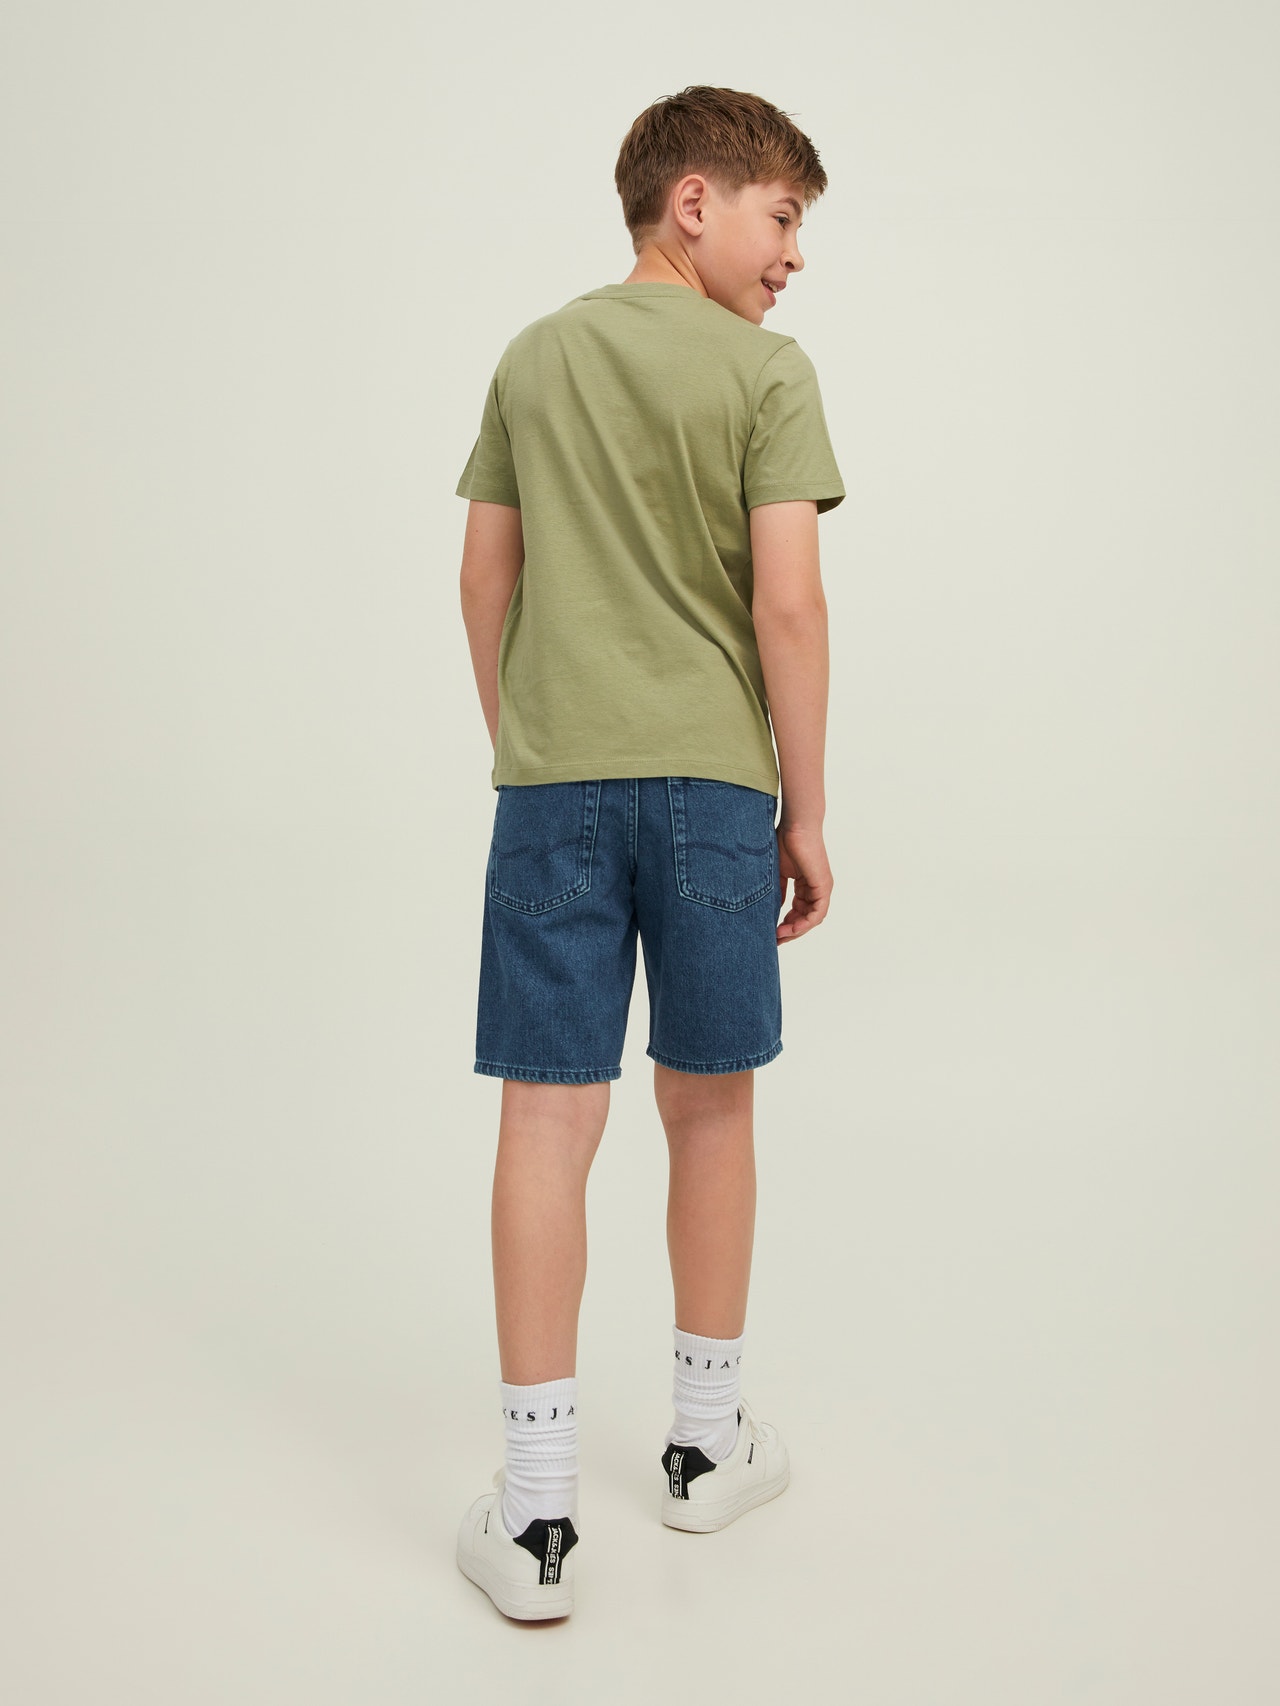 Jack & Jones Relaxed Fit Jeans-Shorts Für jungs -Mineral Blue - 12210644